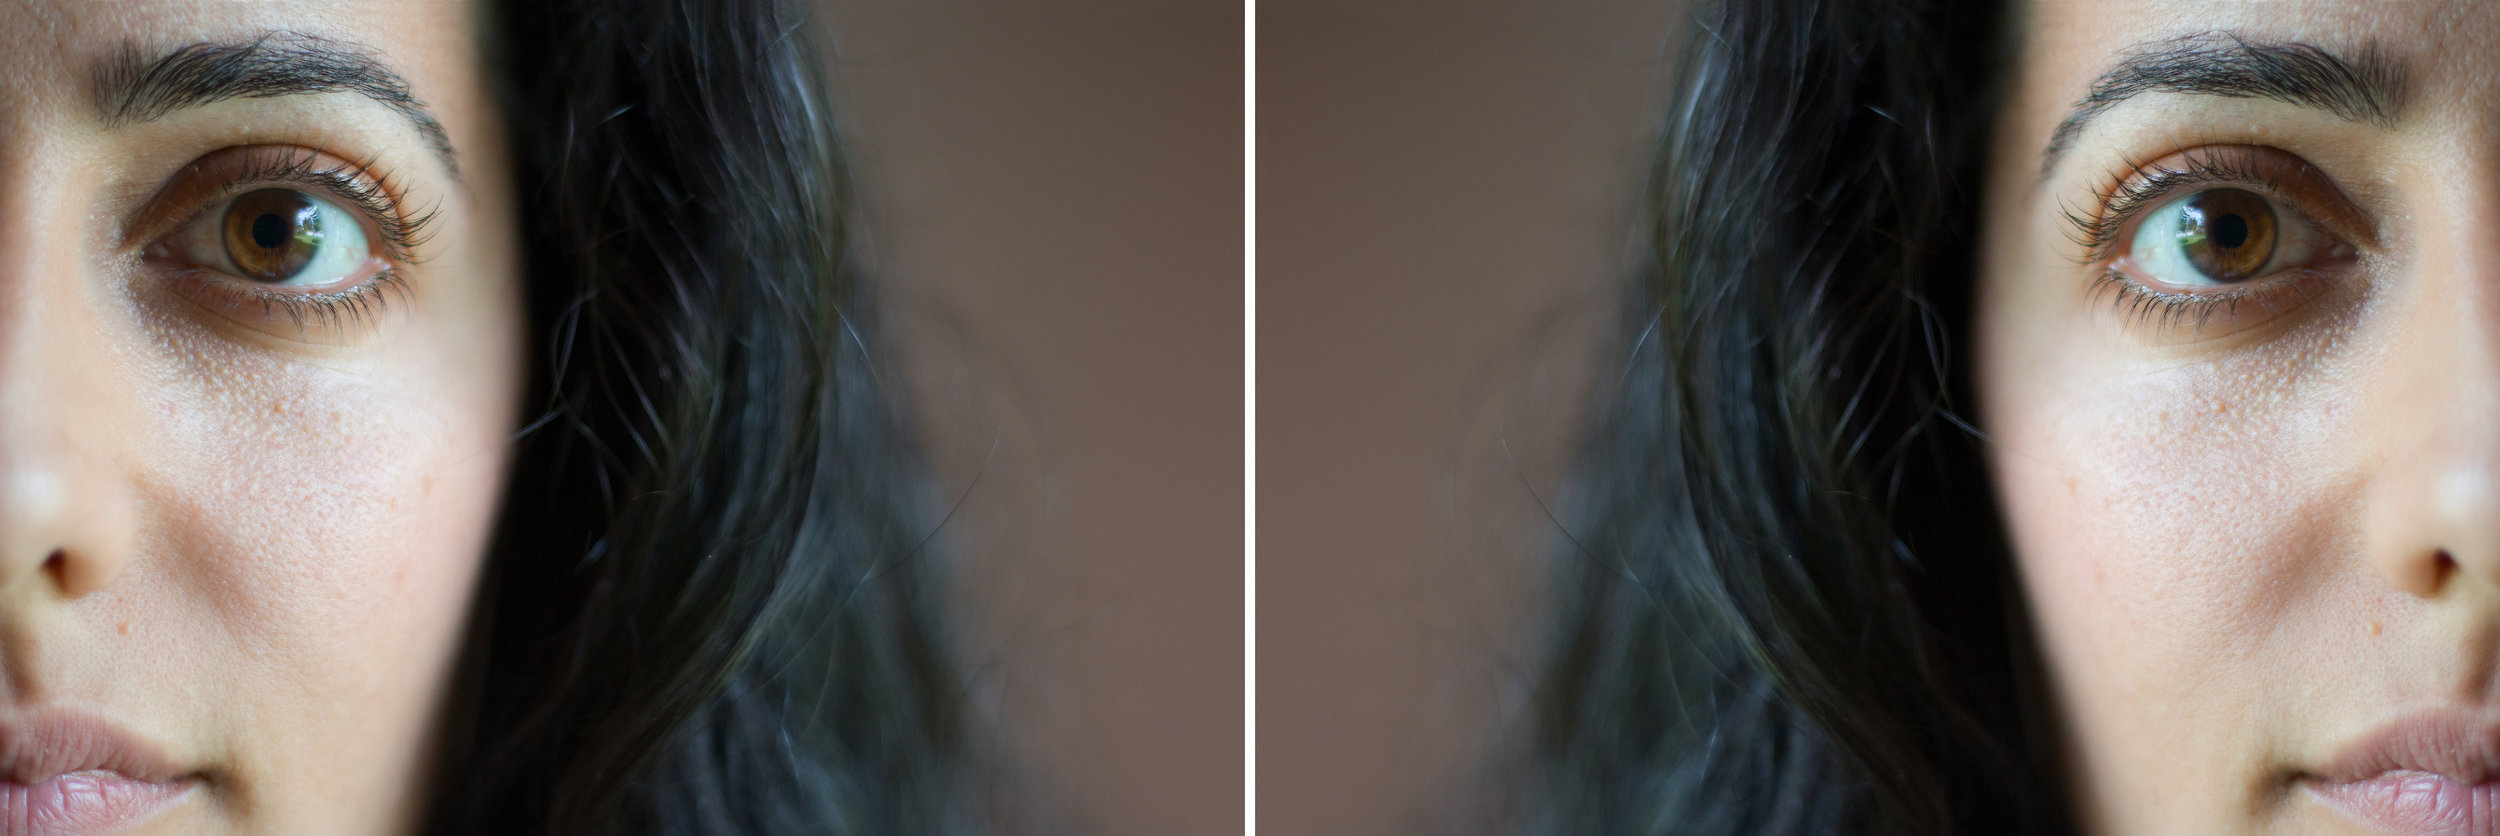 diptych_3-low-res.jpg